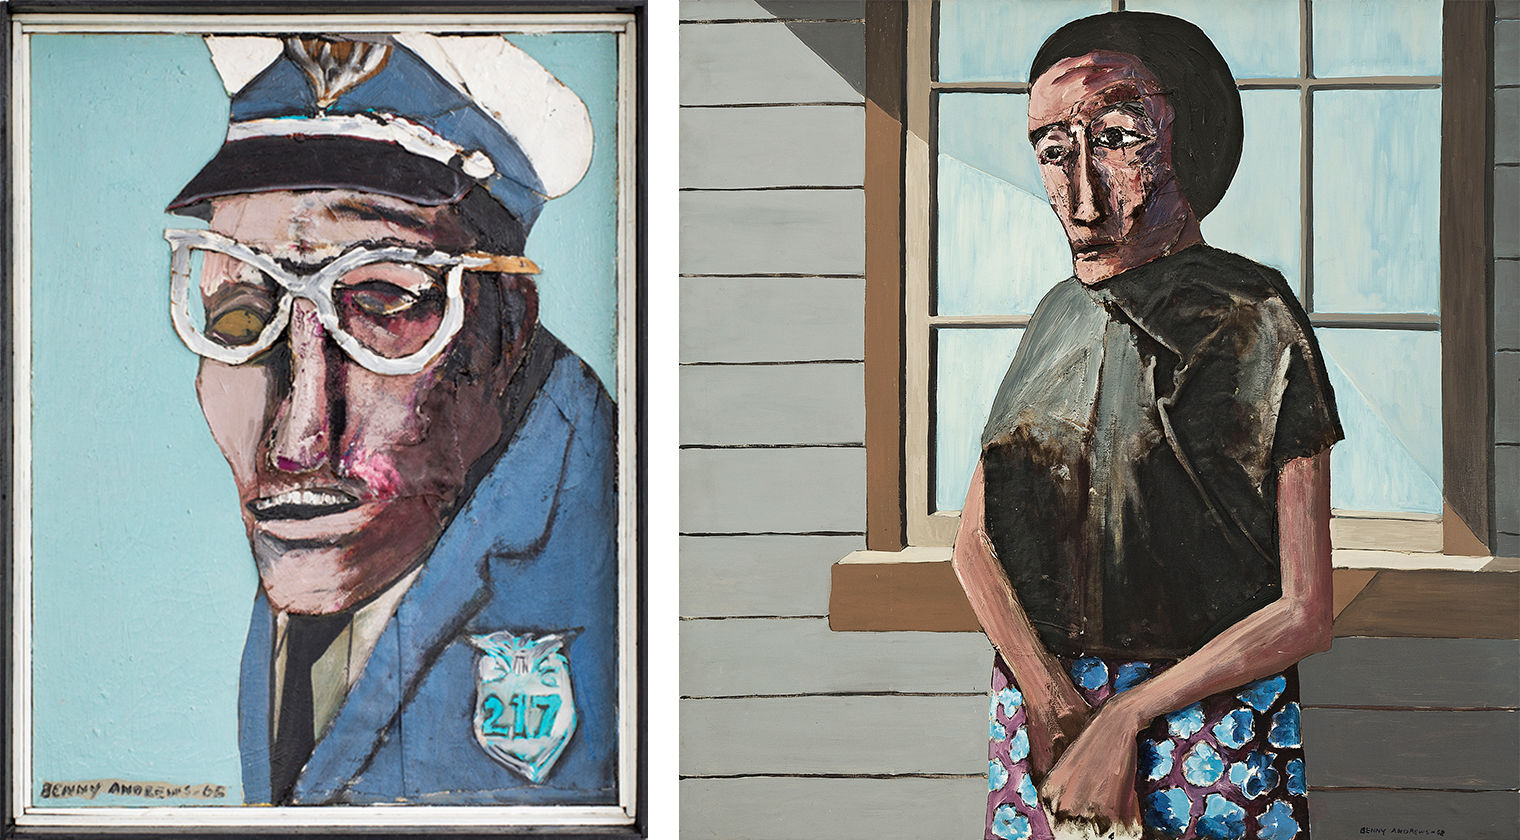 Benny Andrews' The Cop on the left and Witness on the right. Oil on canvas with fabric collage.